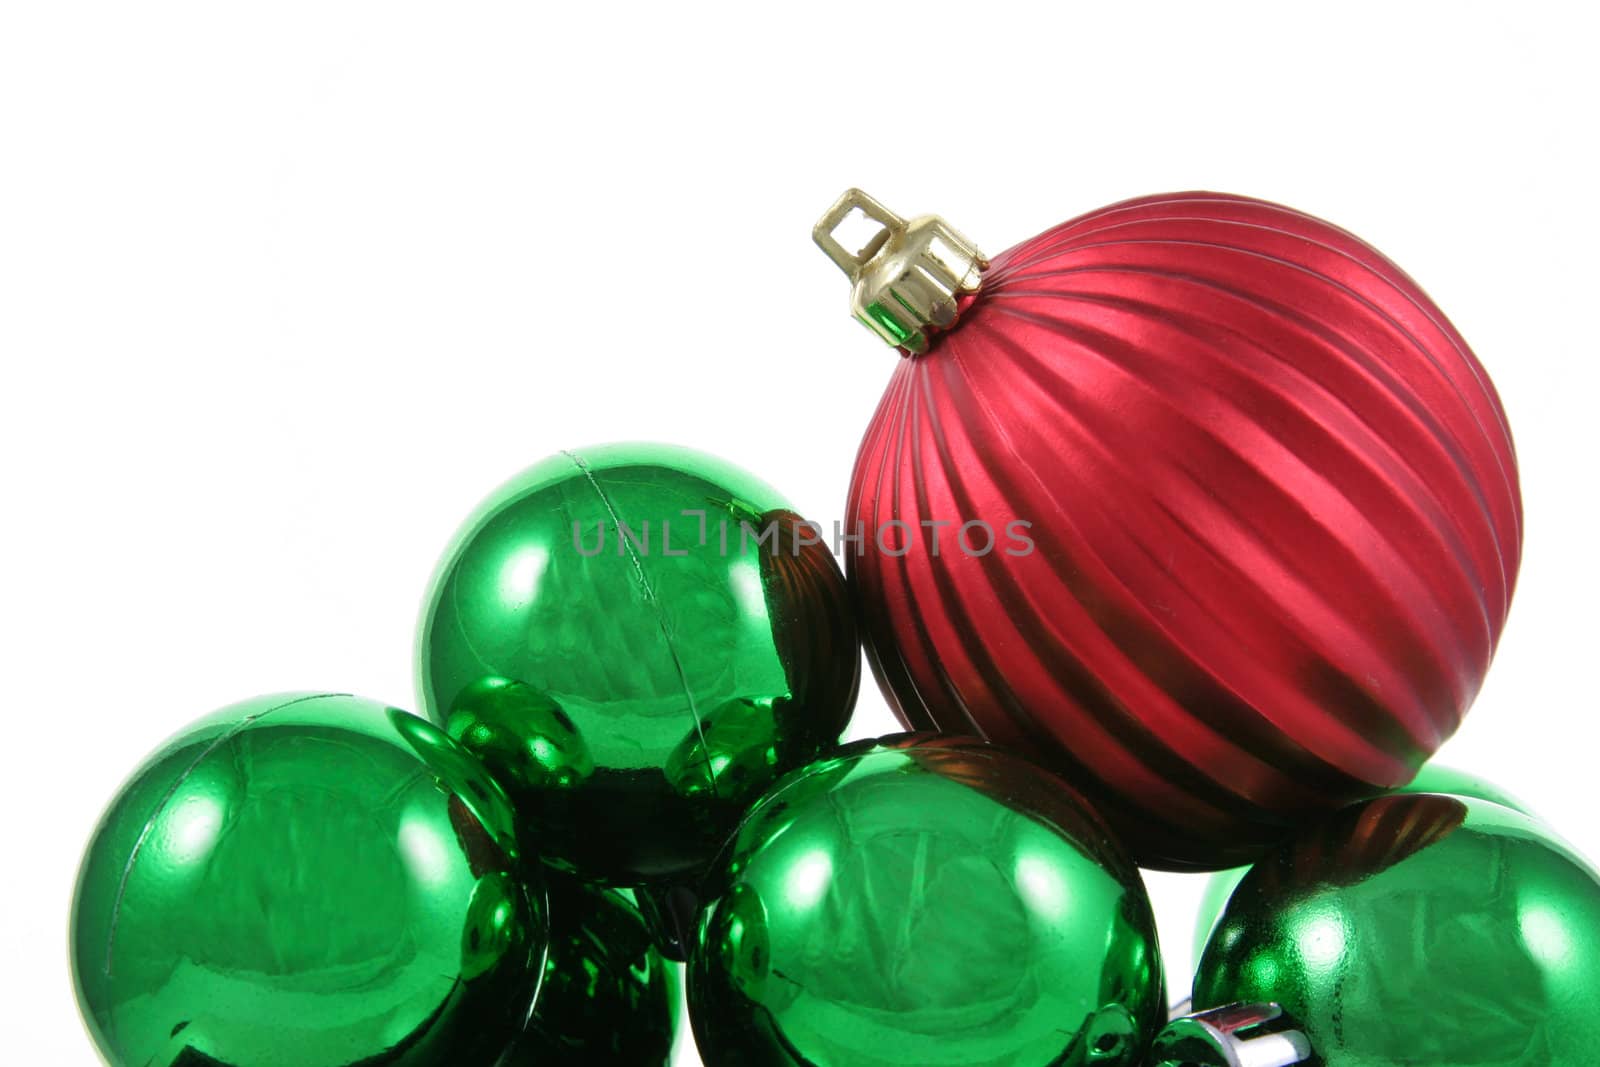 A red bauble sitting on a bunch of green Christmas baubles against a white background.
